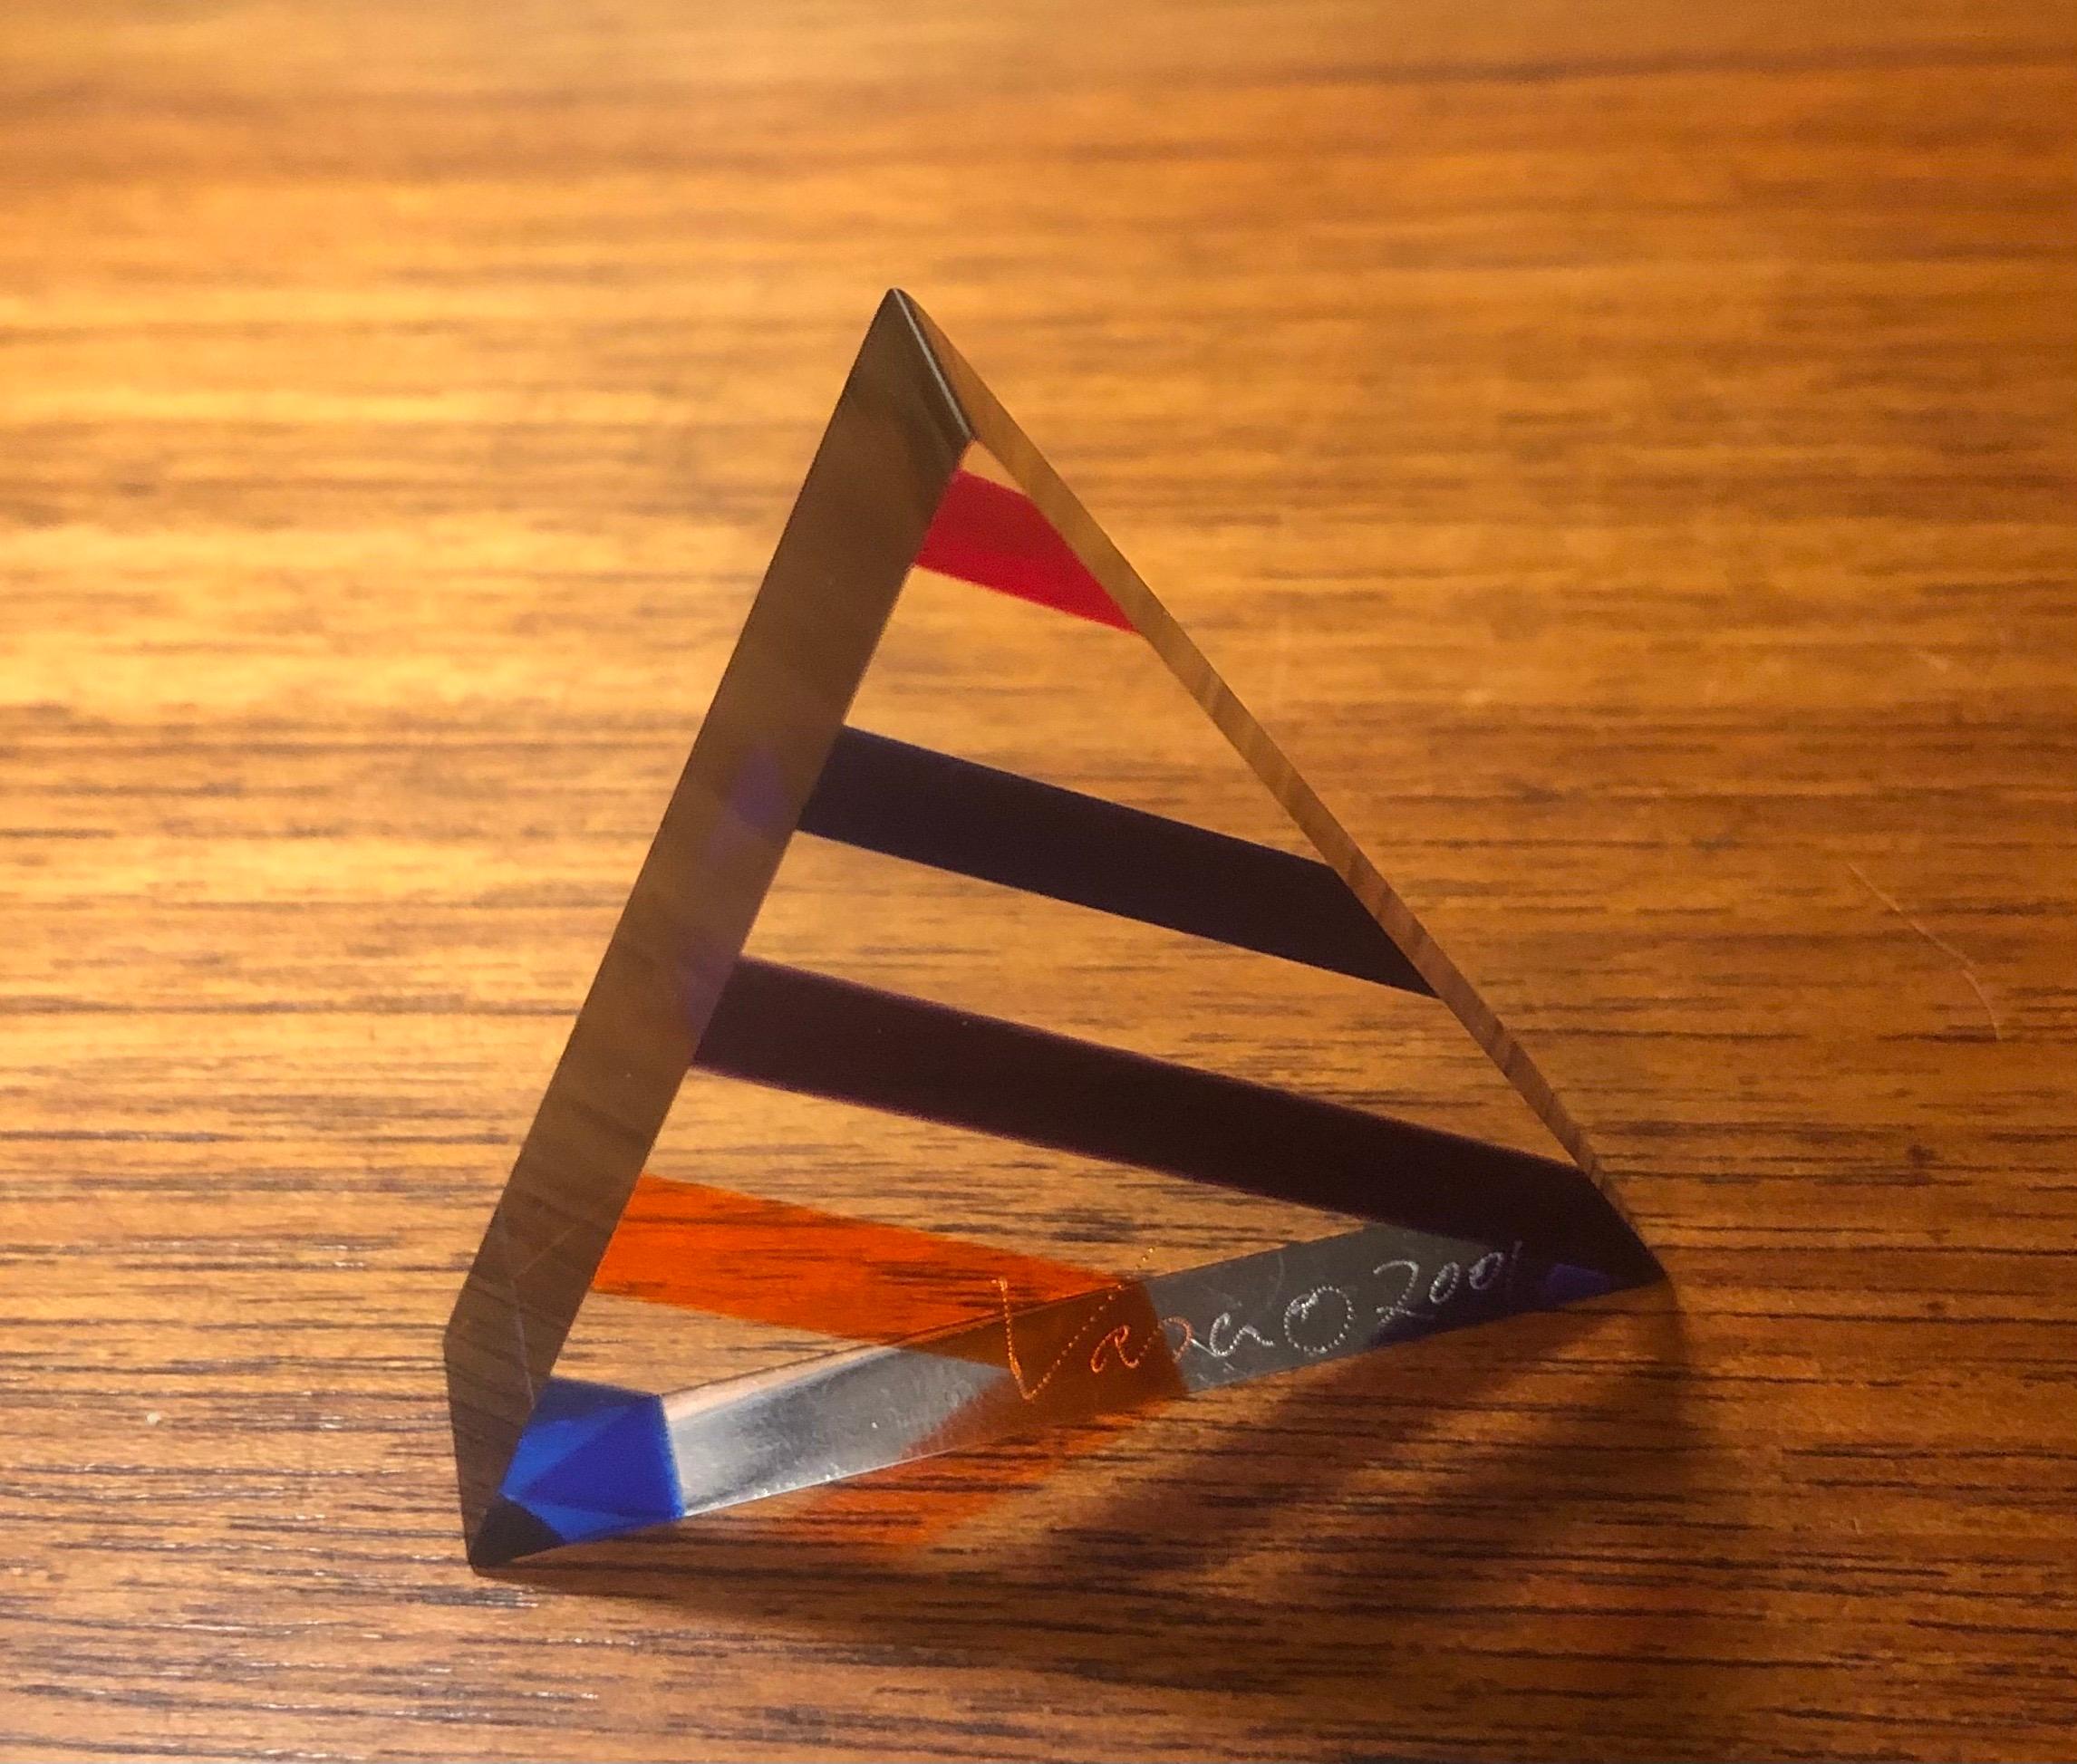 American Op Art Acrylic Triangle Pyramid Sculpture / Paperweight by Vasa Mihich